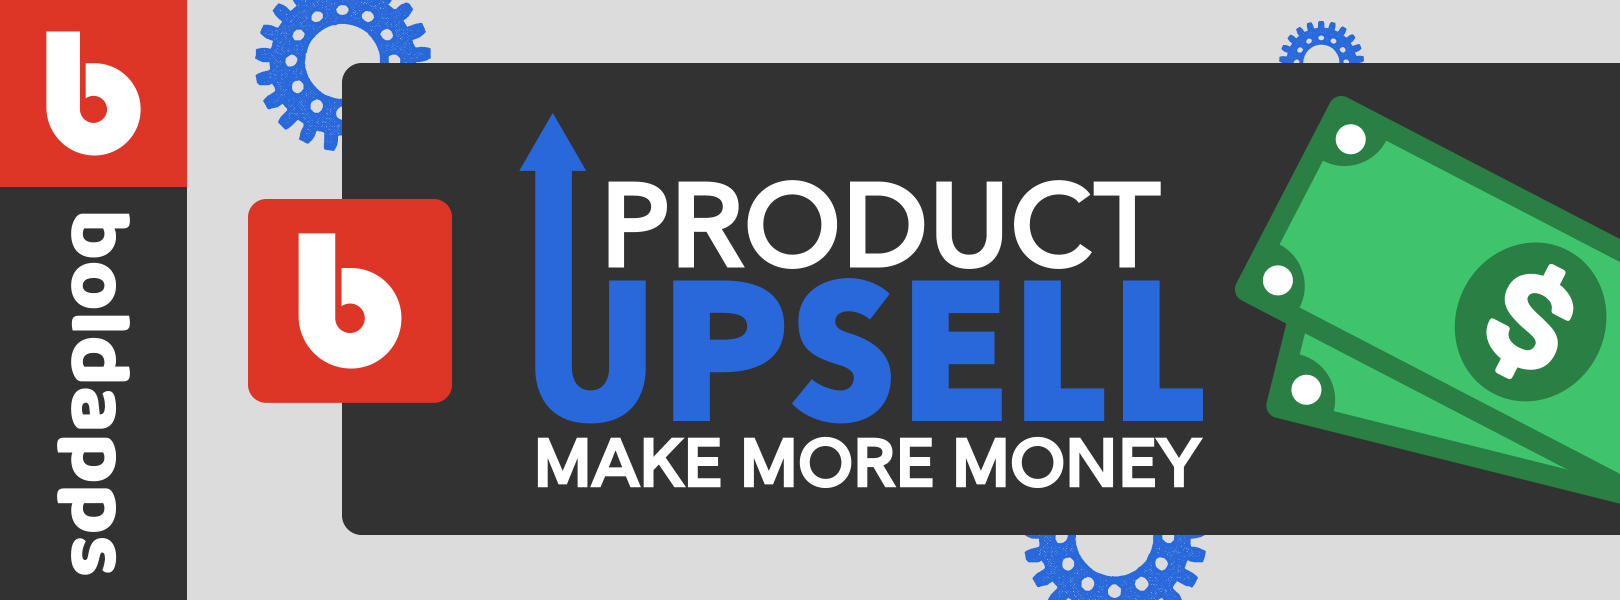 Make more money from your existing customers with upsells